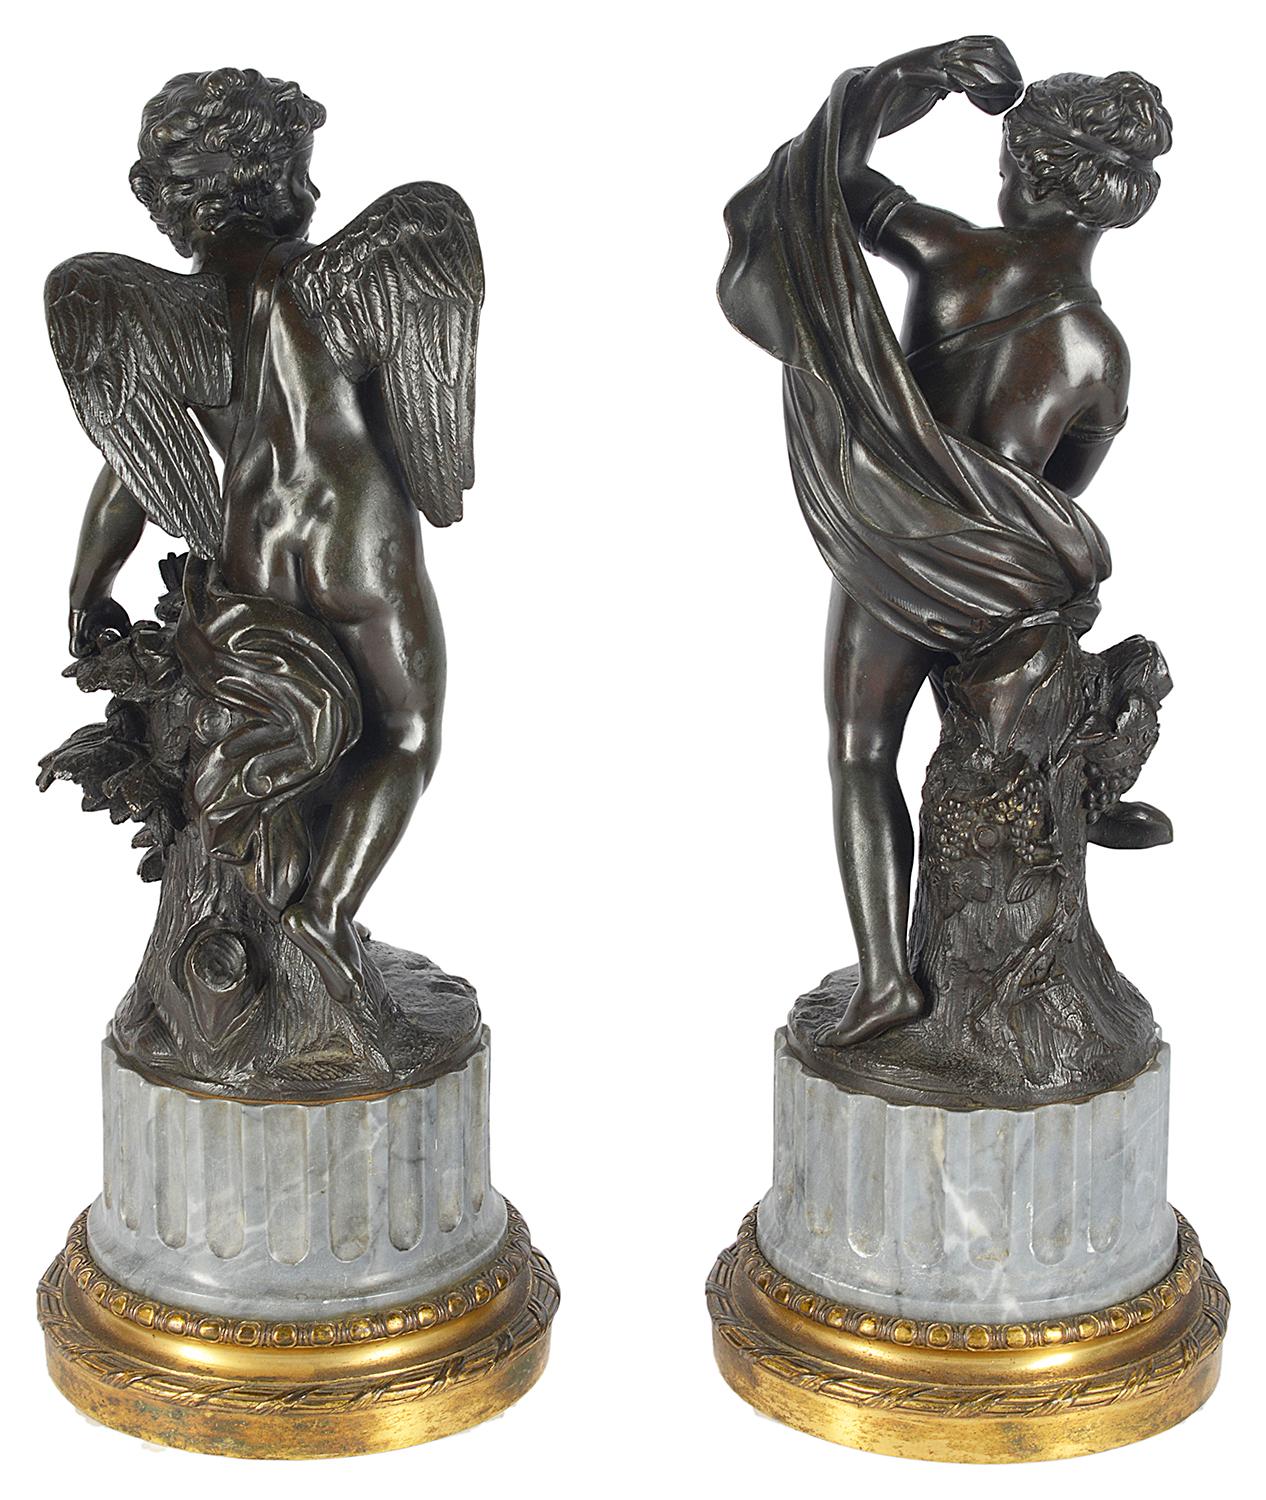 A very good quality pair of classical 19th century bronze statues, depicting a cherub with an arrow and sheath, the other of a semi clad female figure, both mounted on fluted grey marble plinths and gilded ormolu bases.